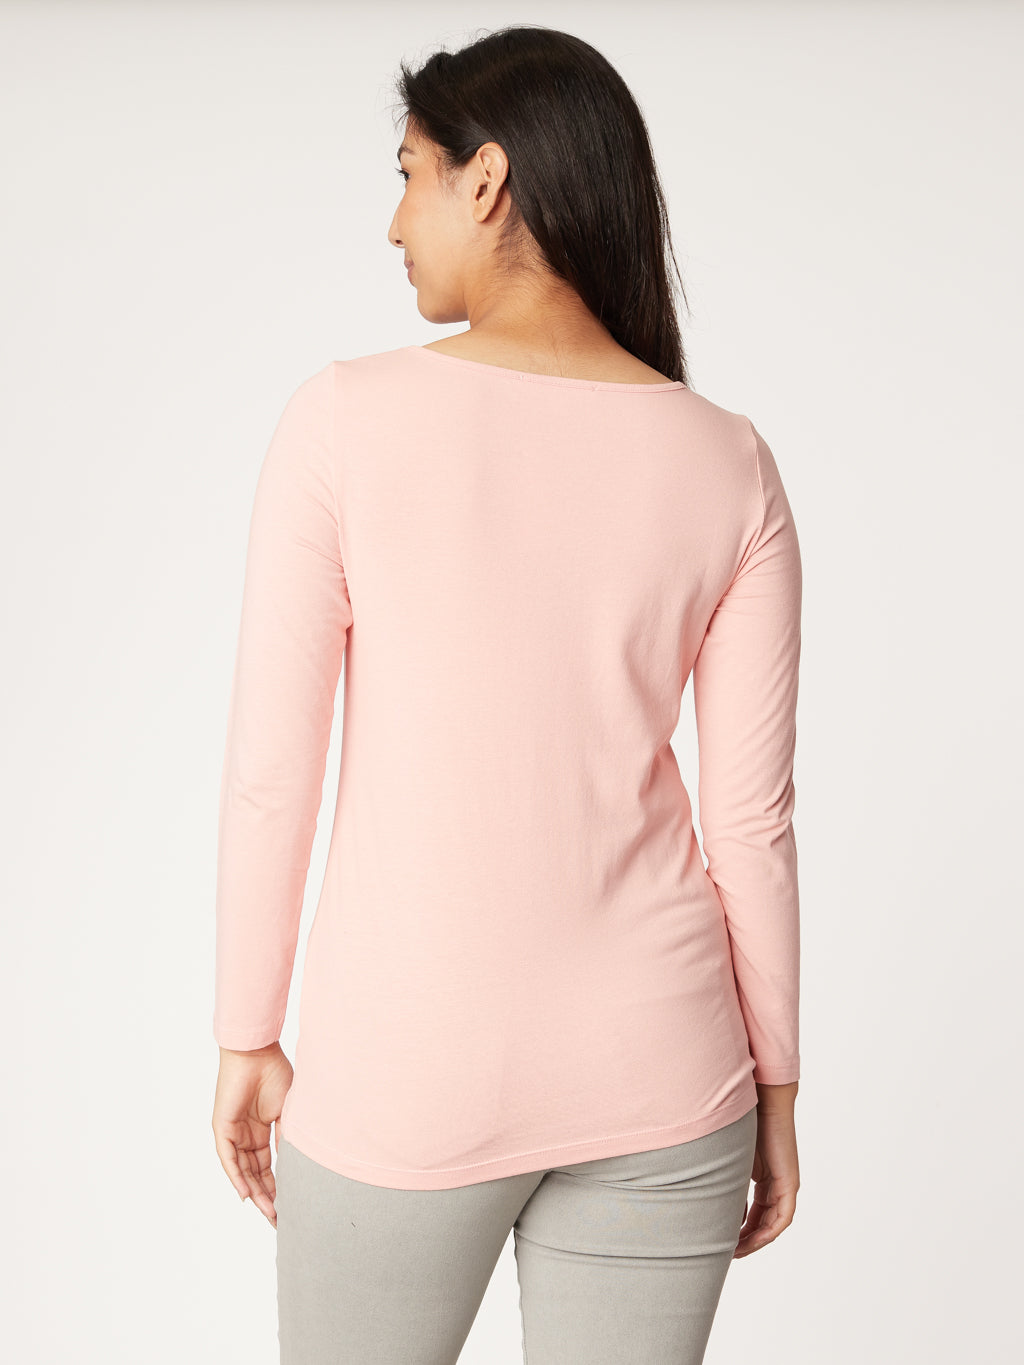 Long-sleeves fitted t-shirt